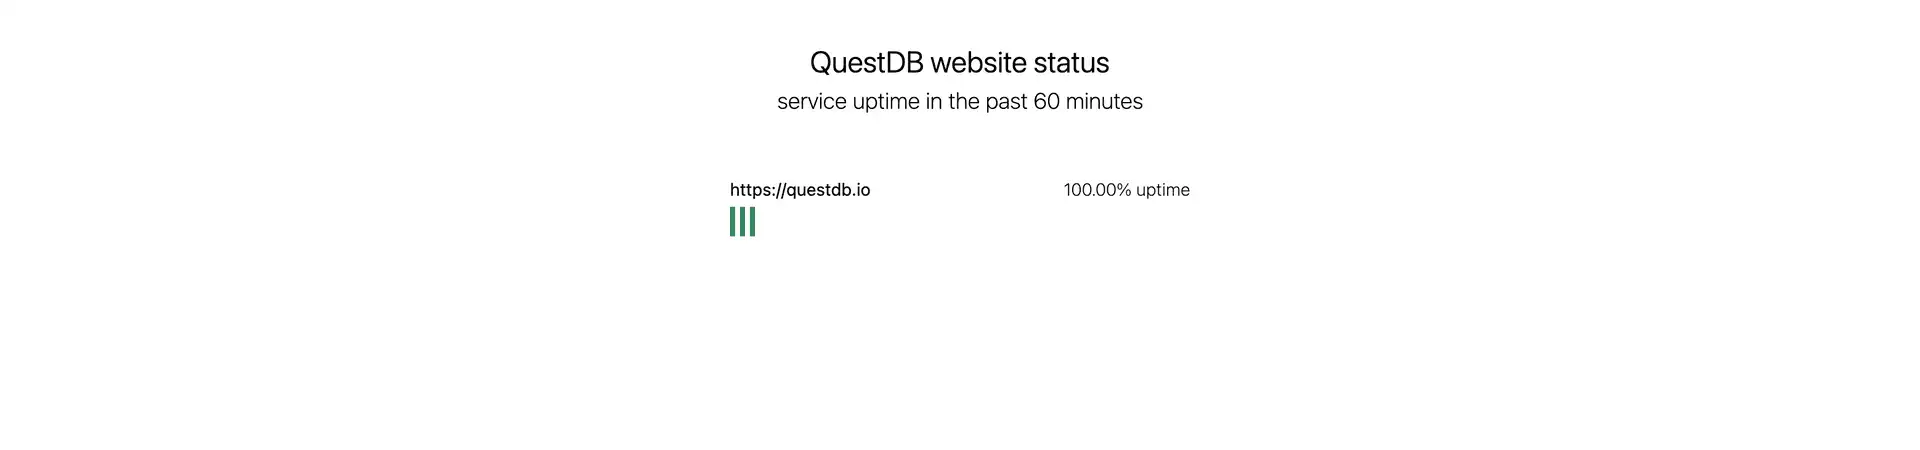 An uptime indicator having fetched the status of the QuestDB website over 3 minutes